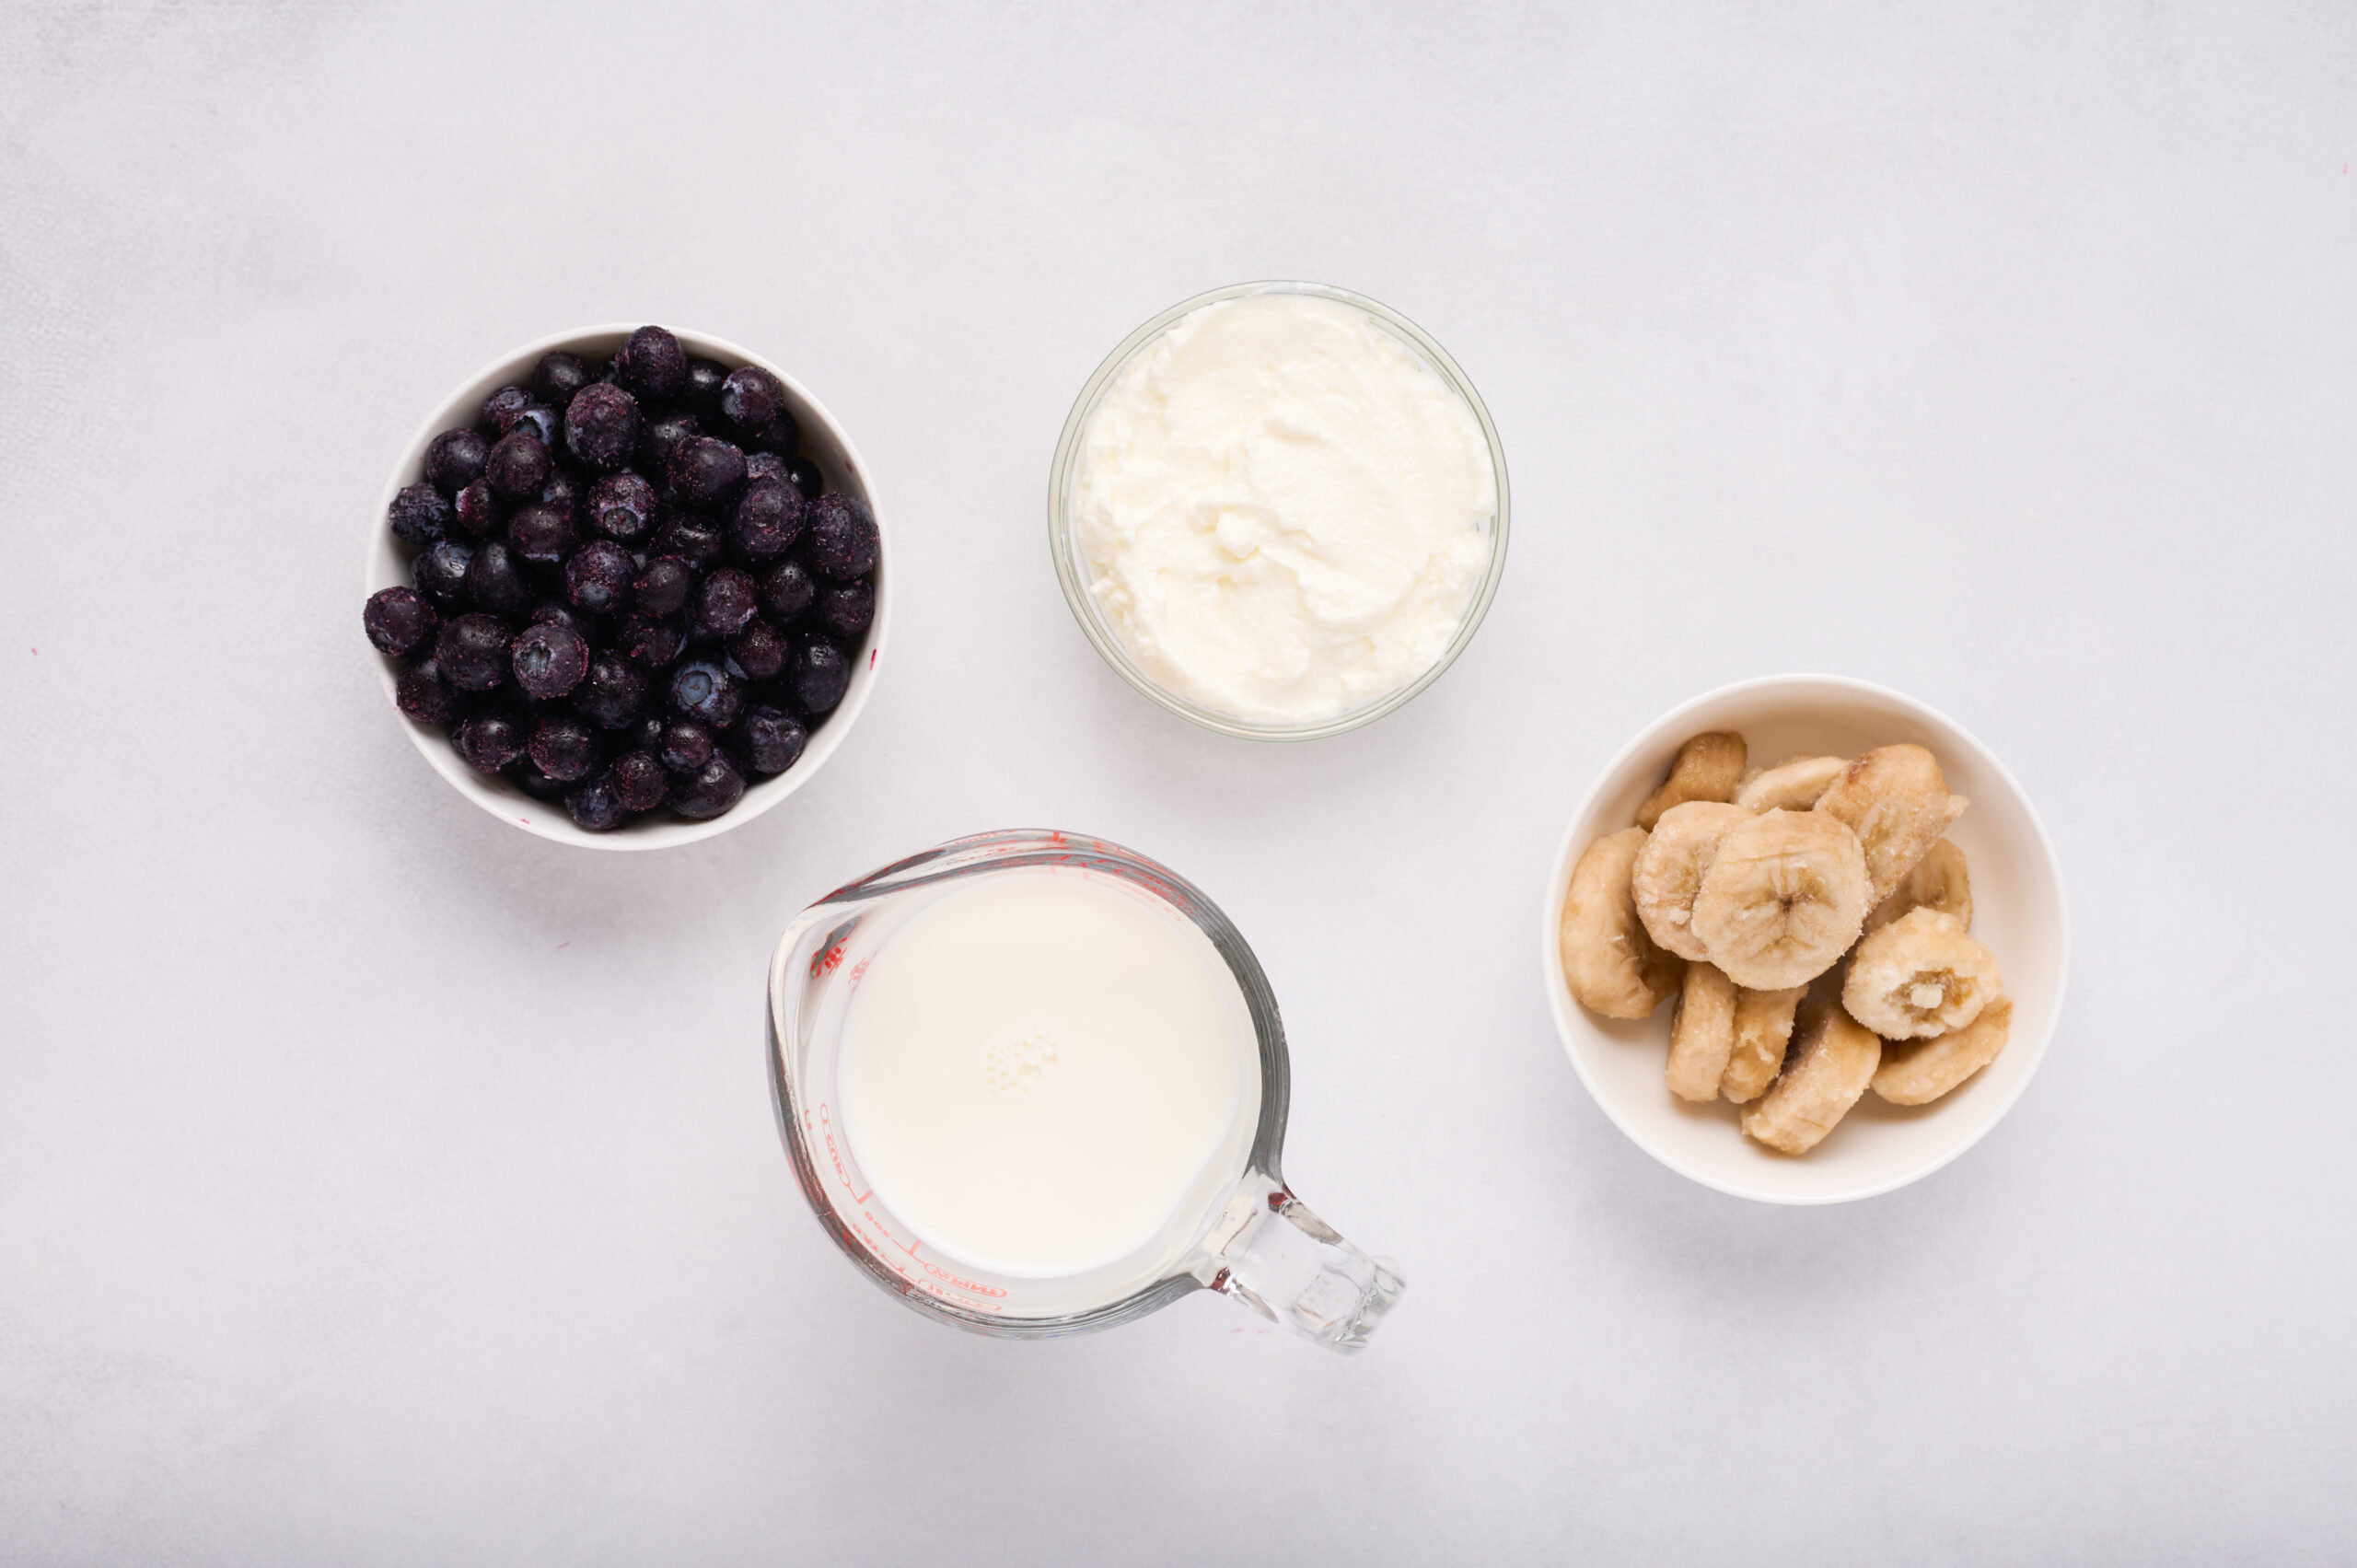 ingredients needed for blueberry smoothie